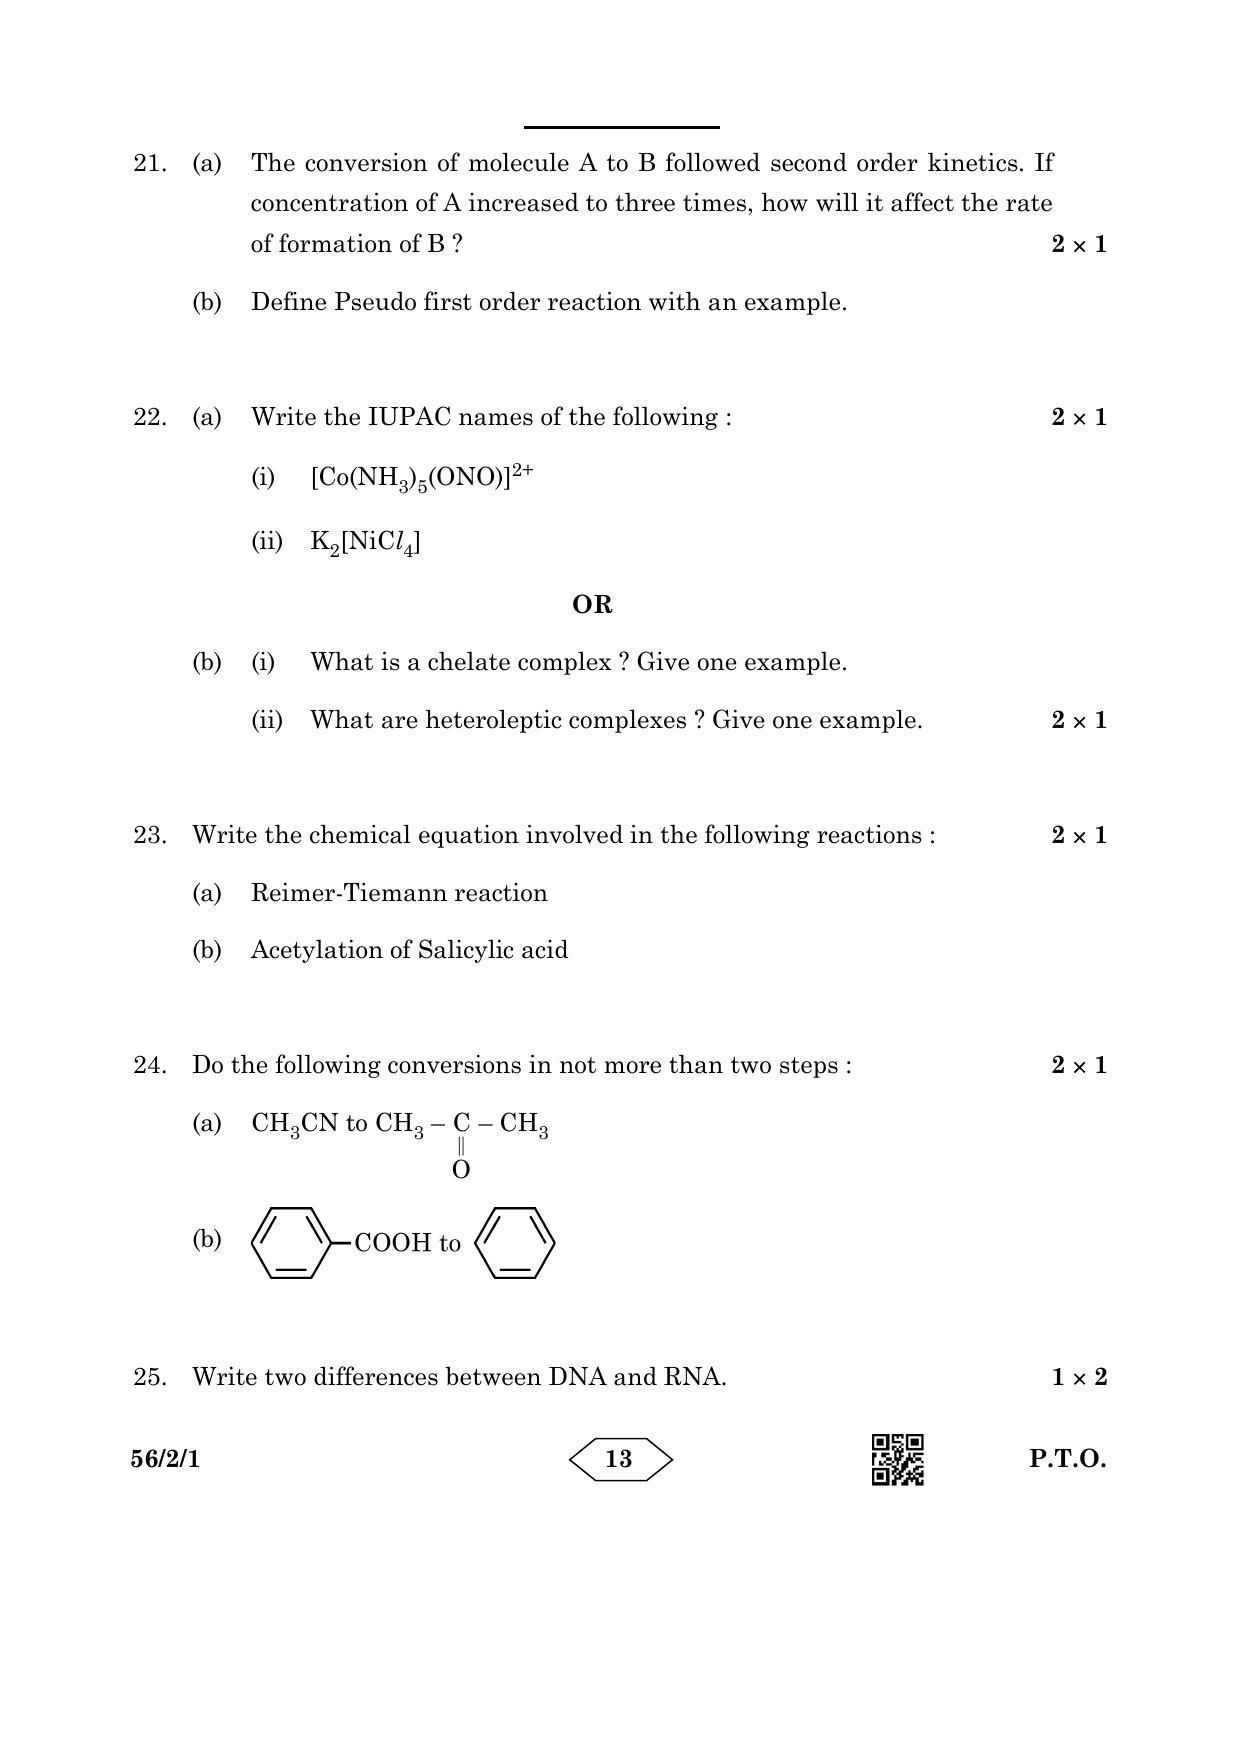 CBSE Class 12 56-2-1 Chemistry 2023 Question Paper - Page 13